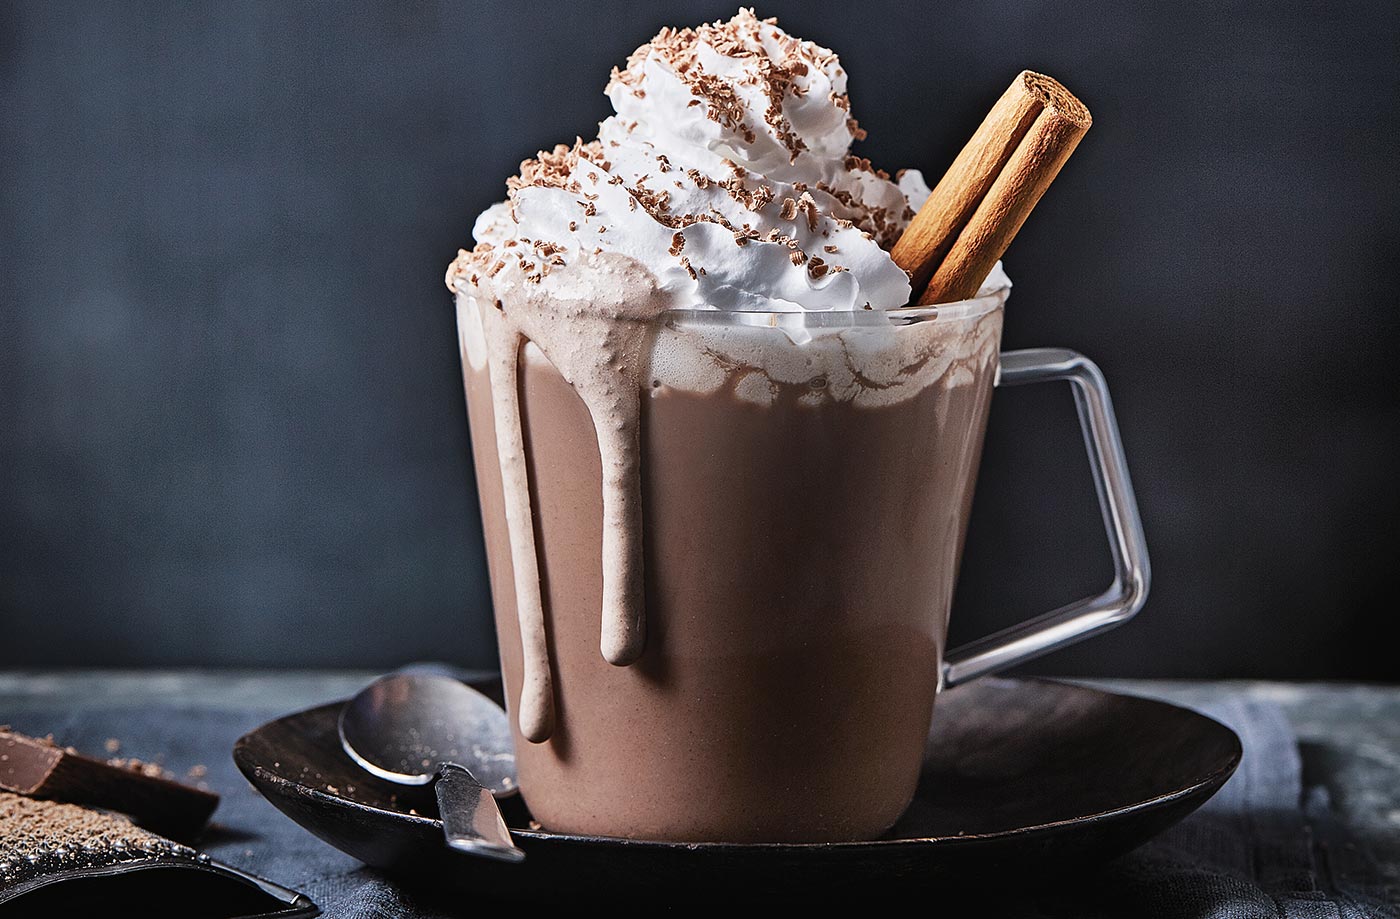 Reign In The Holidays With The Homemade Specialty Hot Chocolate That Santa Claus Drinks!